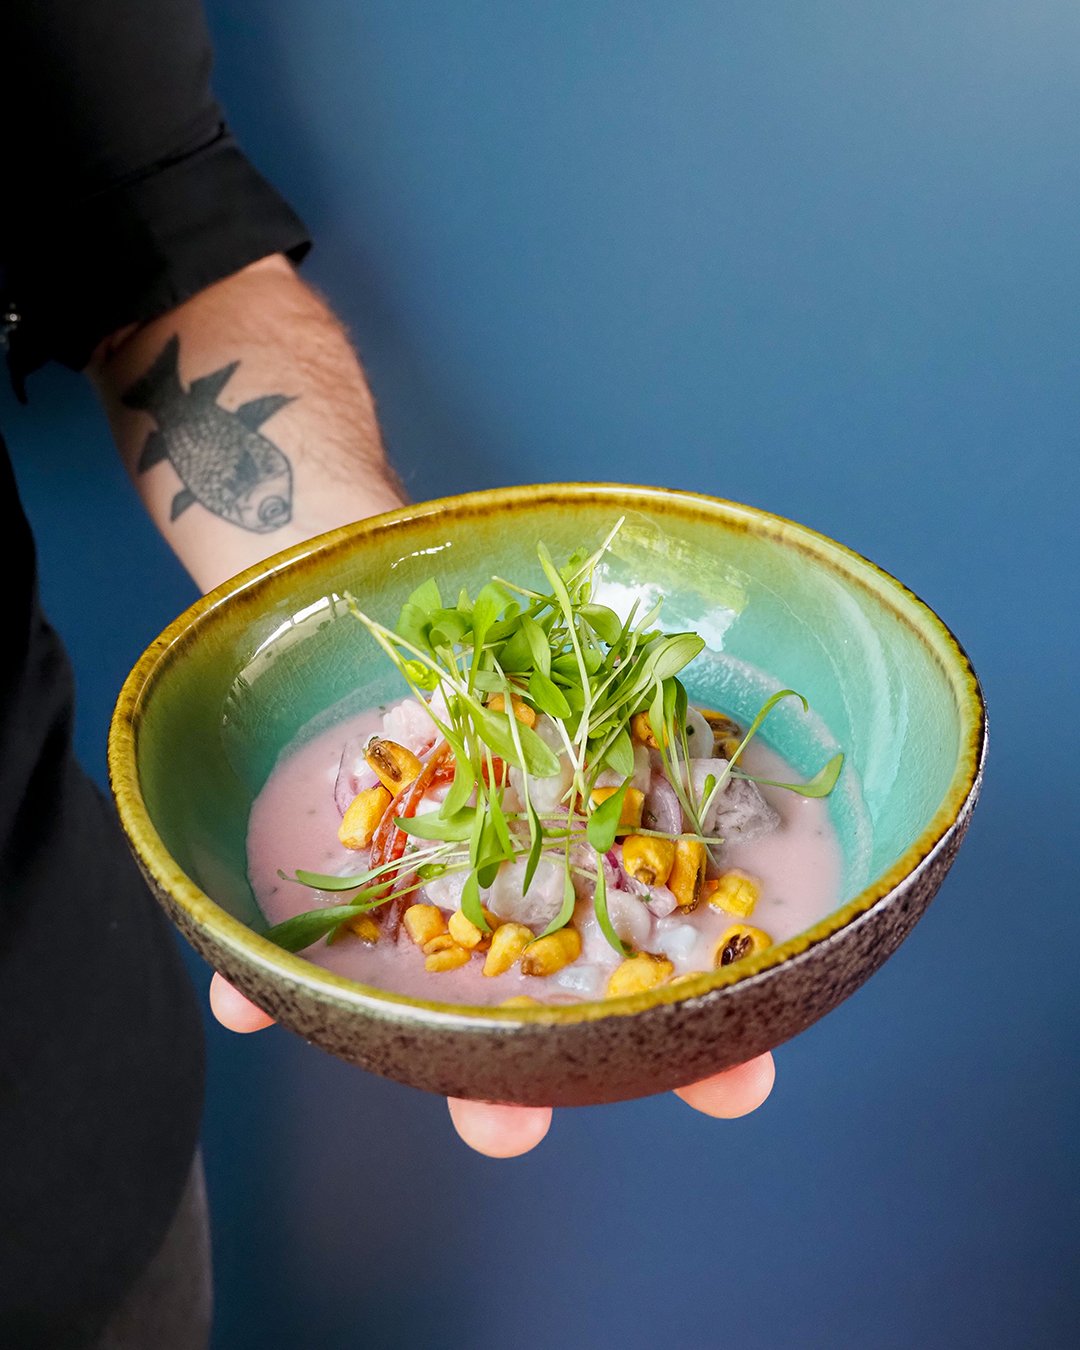 Does it taste like summer? Absolutely.
Is it a dive into the sea? Without a doubt.
Our new Ceviche.
We warn you, the rest is up to you. Bookings on the Link in Bio.
~
Sabe a Ver&atilde;o? Sabe. 
&Eacute; um mergulho no Mar? Sem d&uacute;vida. 
O noss